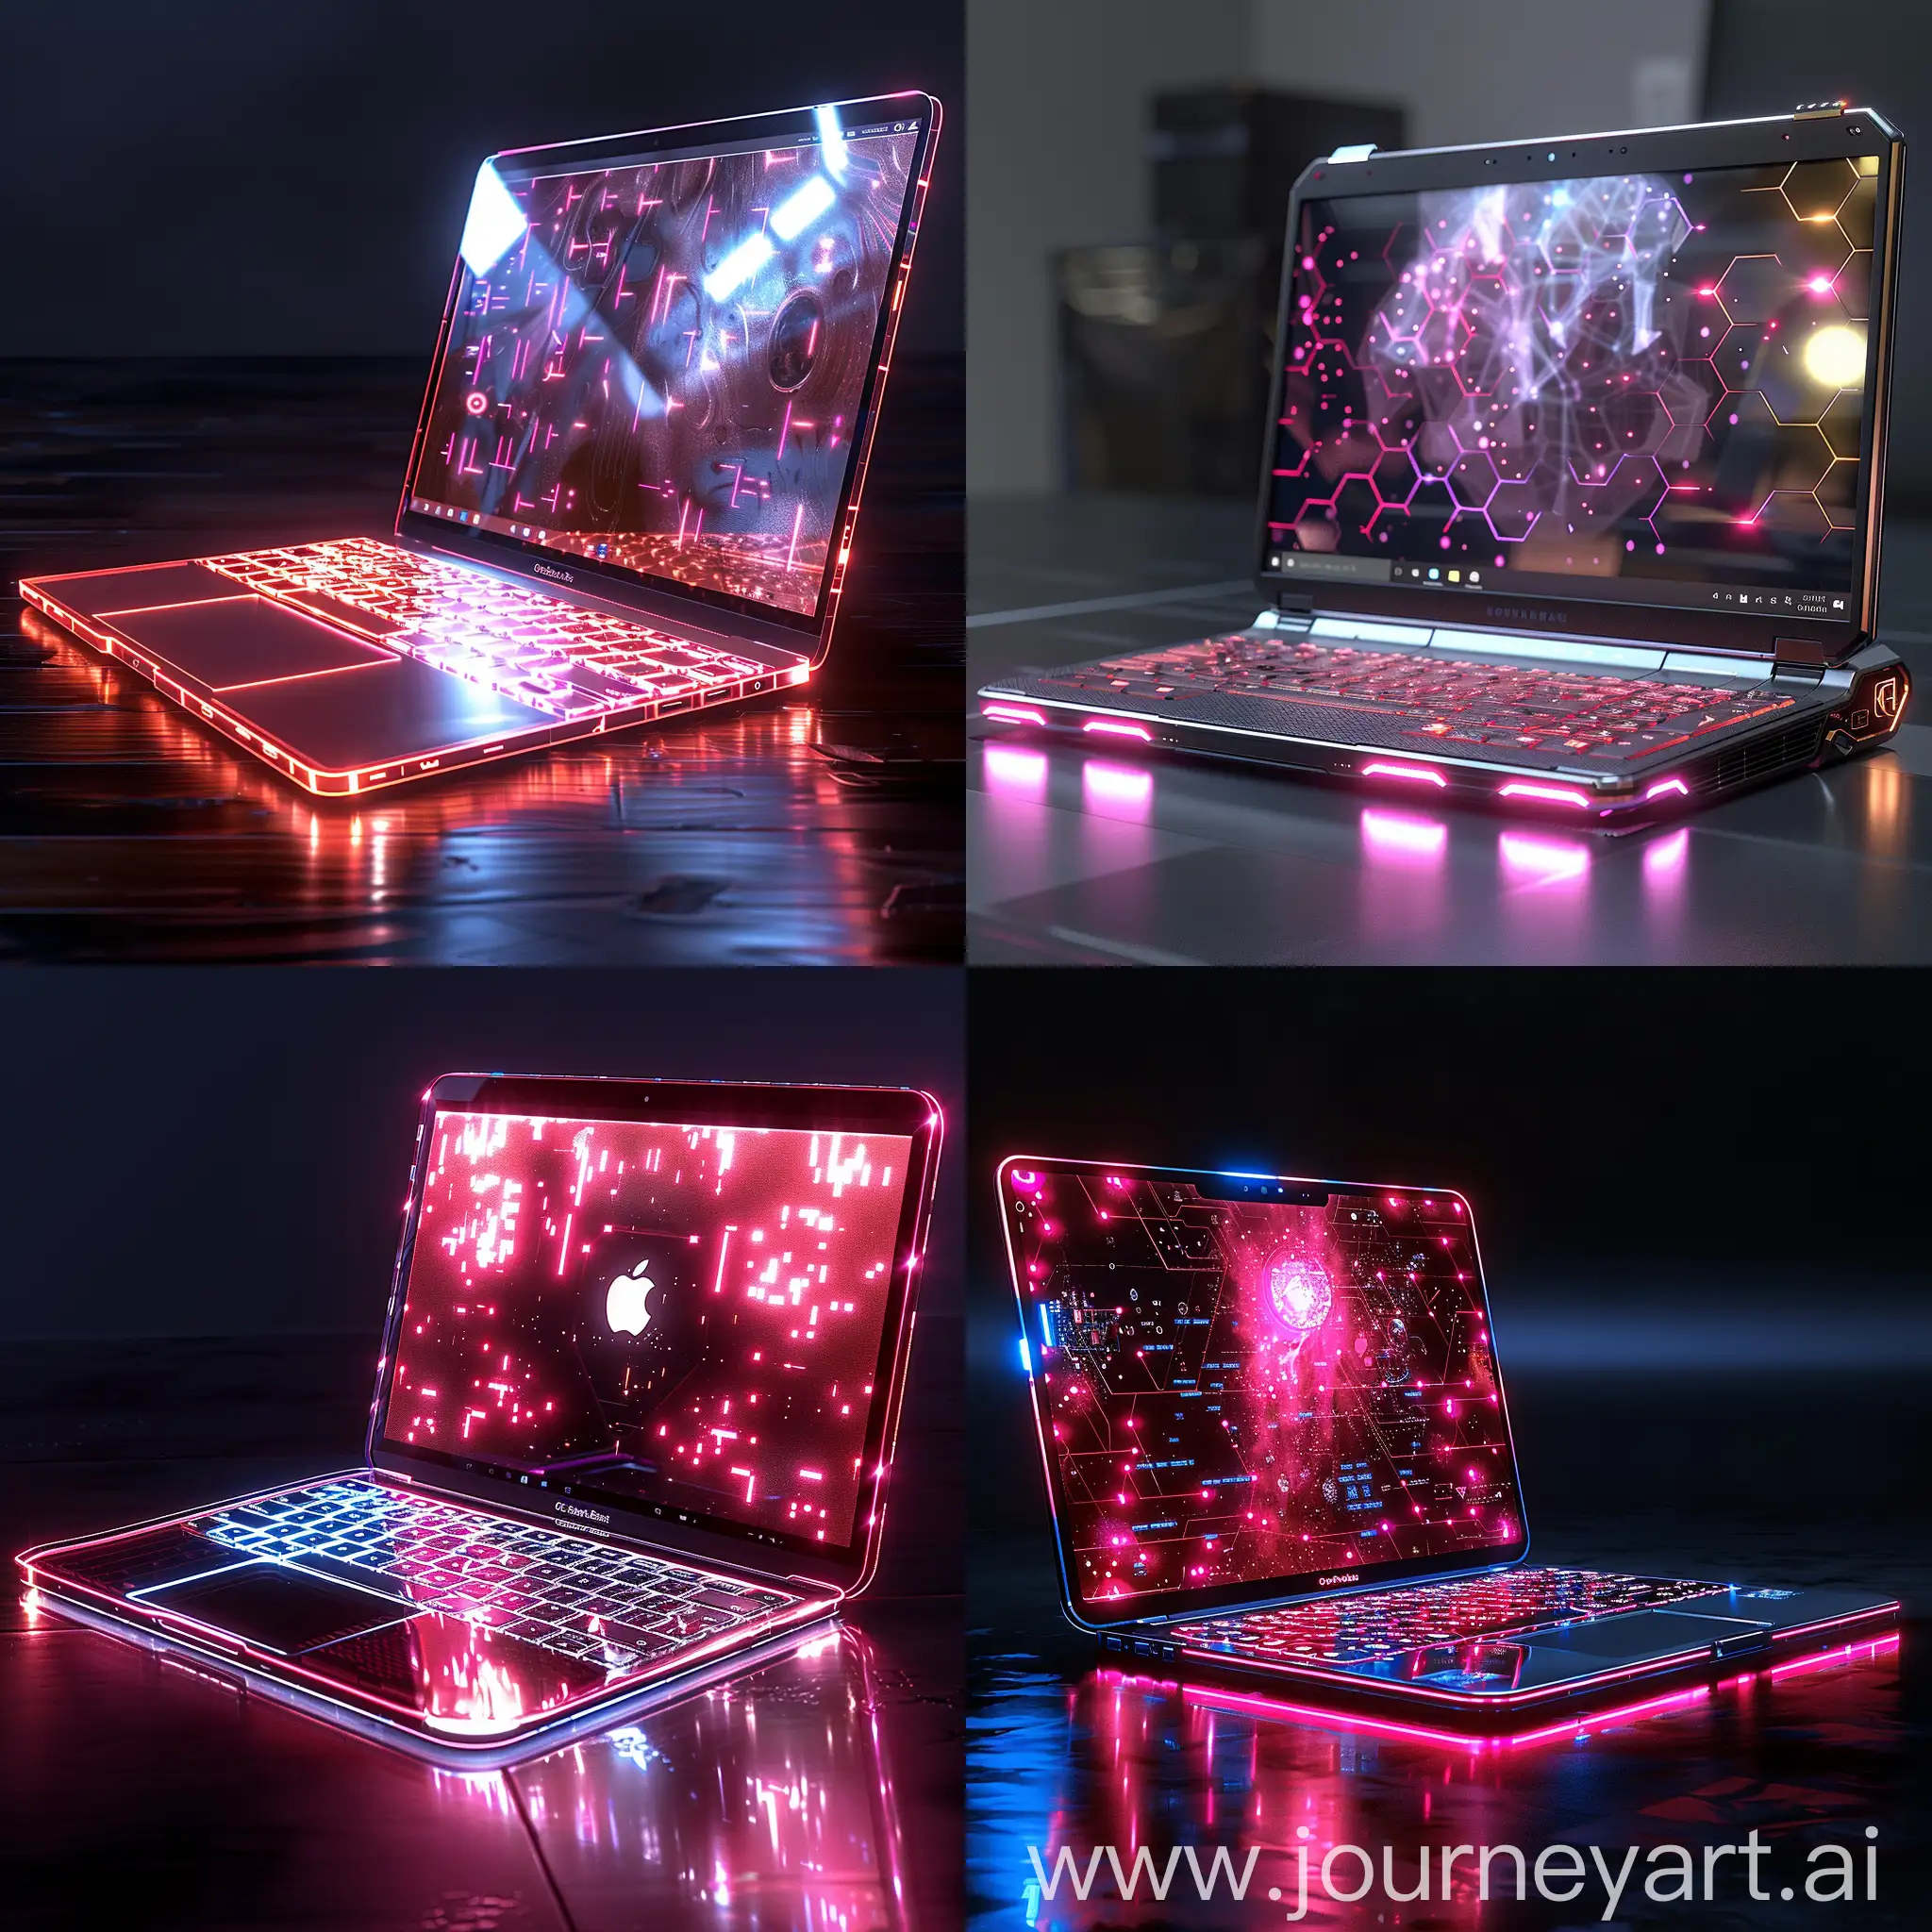 Futuristic-Laptop-with-Holographic-Display-and-Biometric-Security